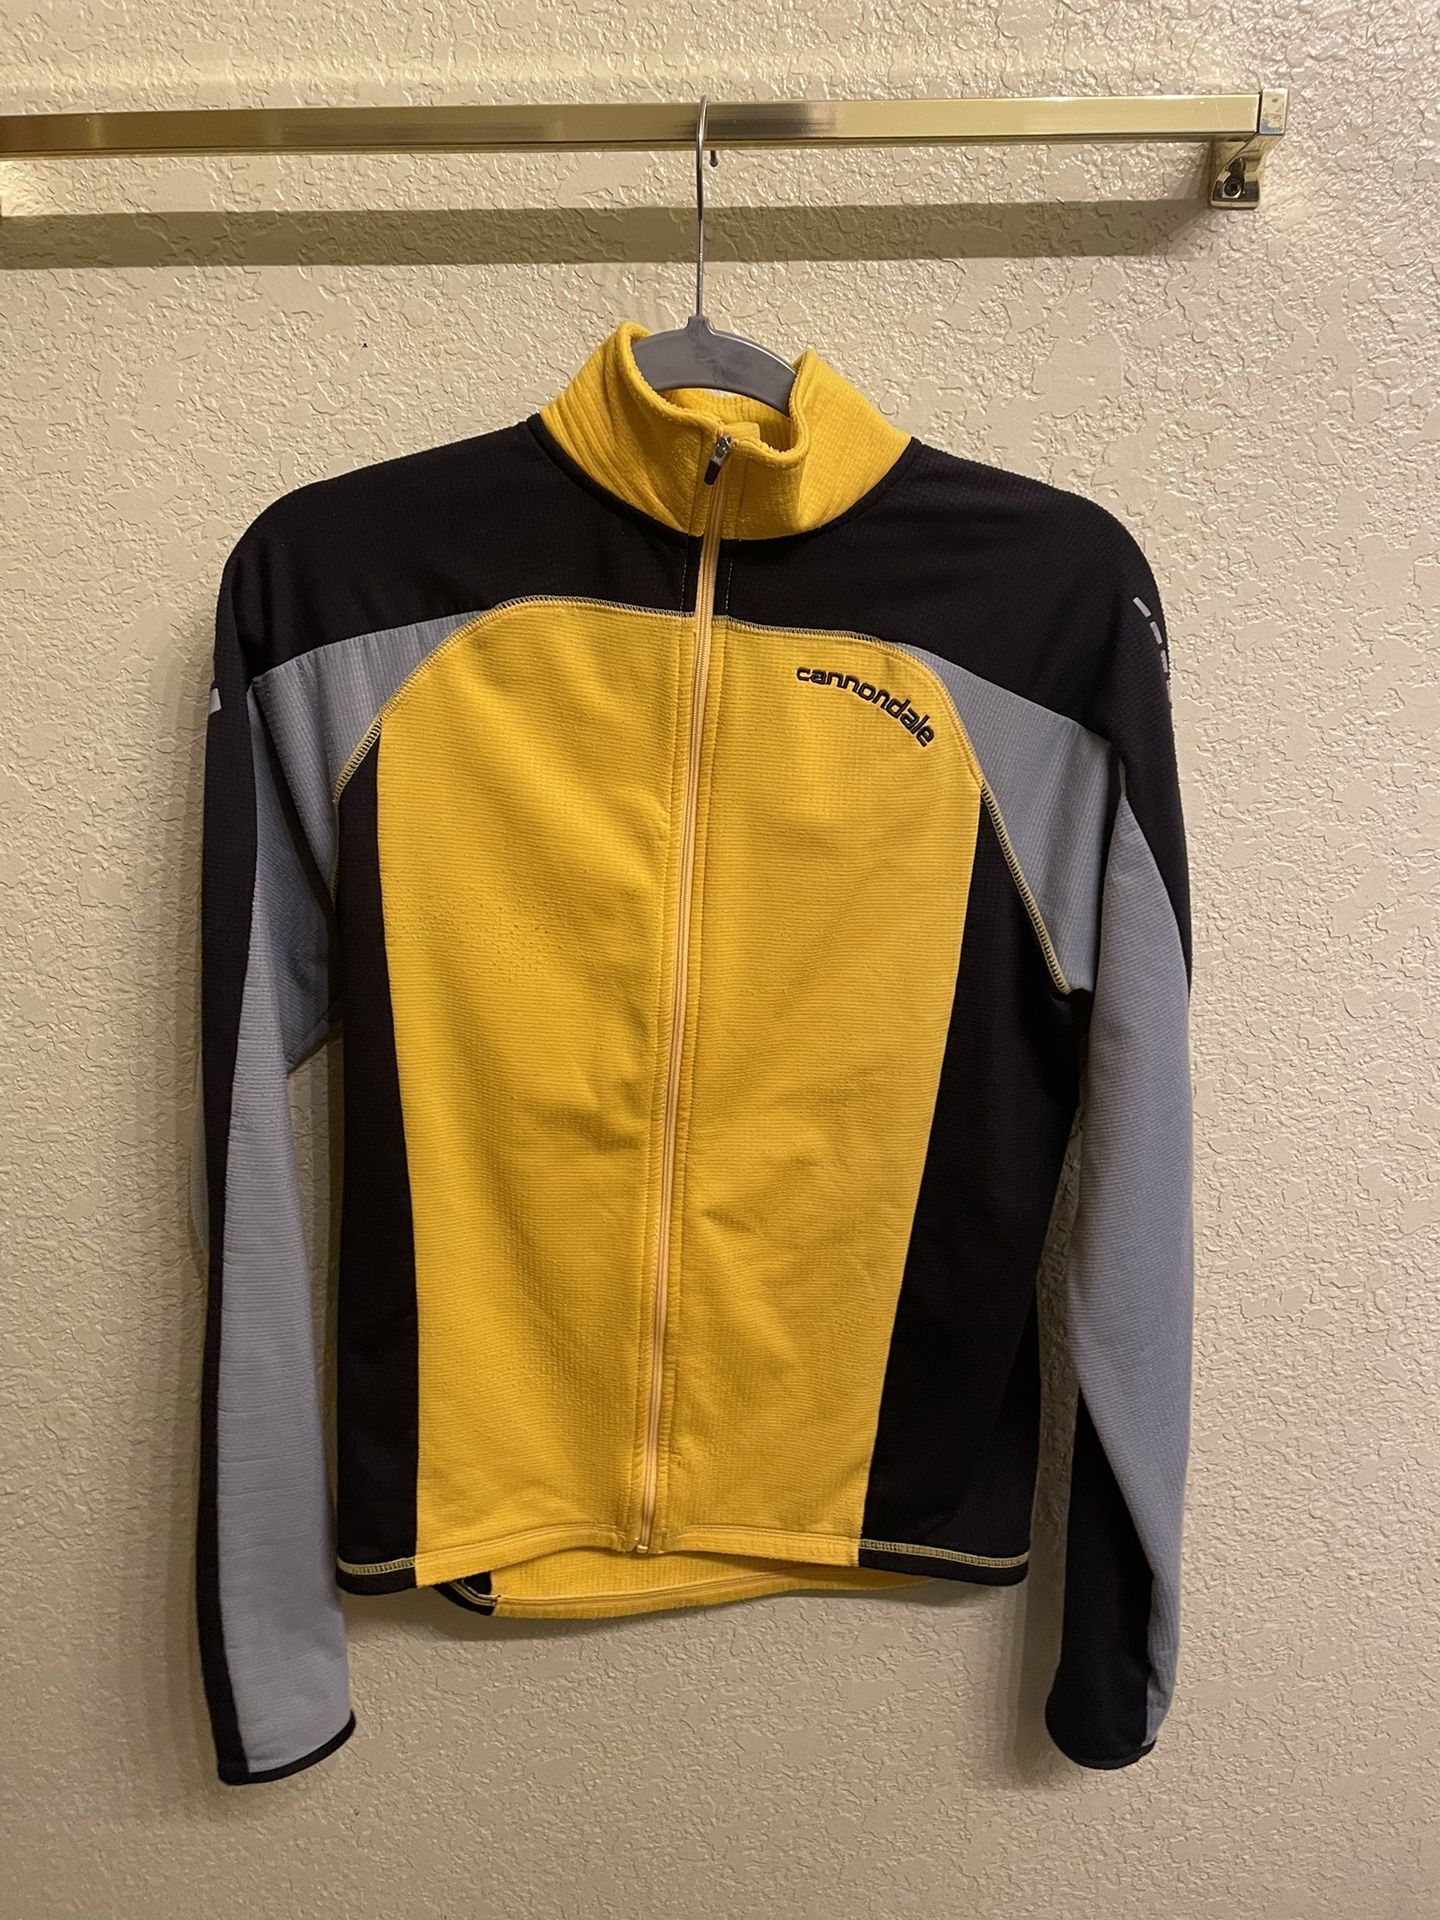 Vintage Cannondale Cycling Shirt 